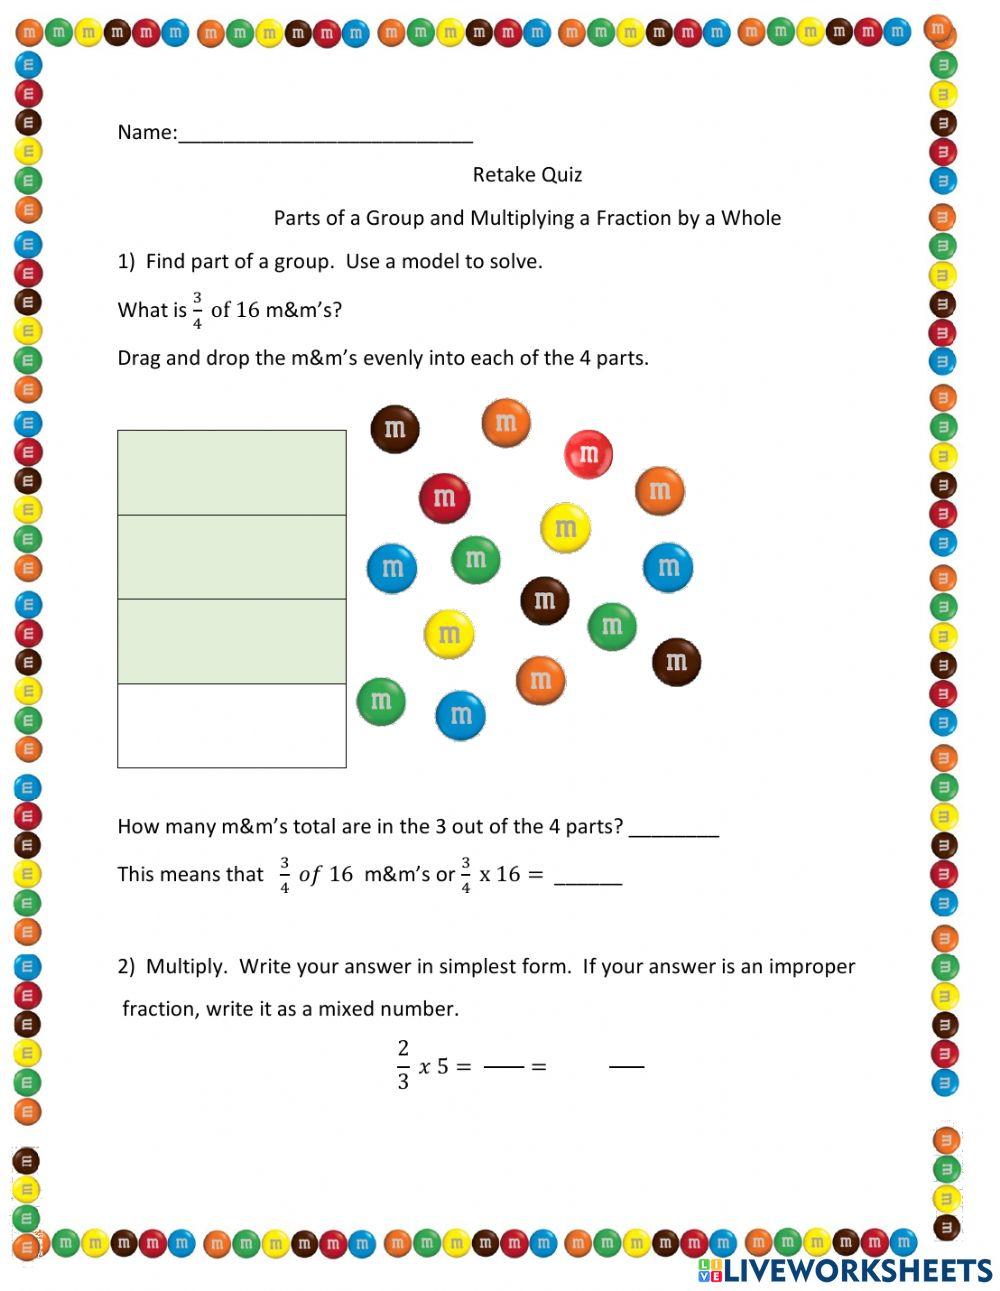 Retake Quiz Parts of a whole and Multiplying Fractions with Whole Numbers